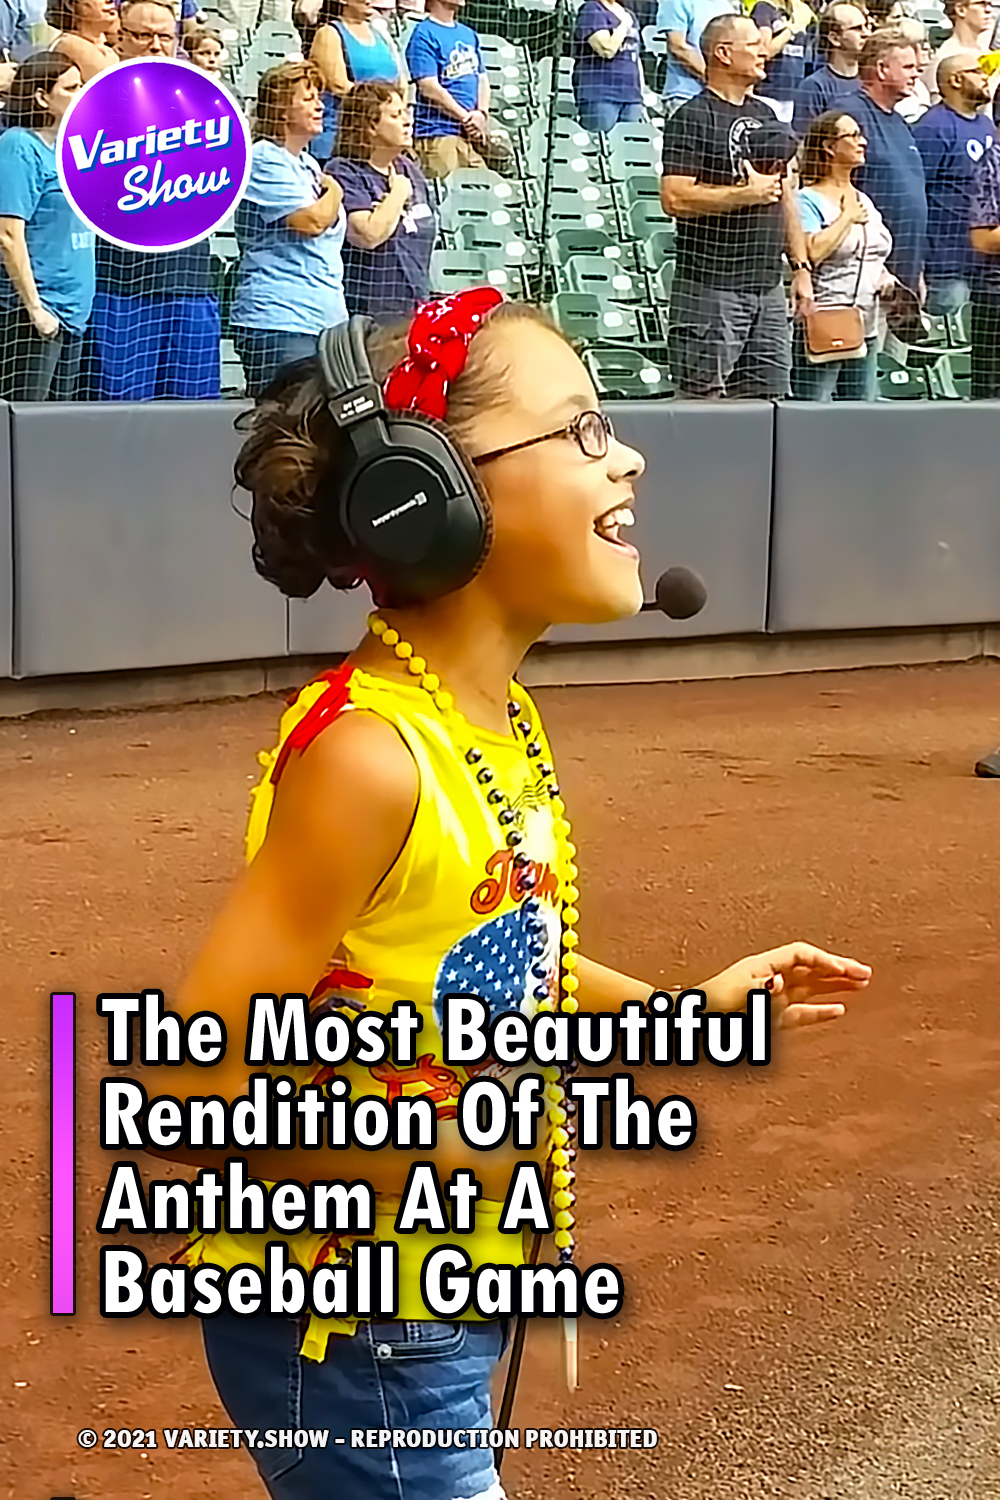 The Most Beautiful Rendition Of The Anthem At A Baseball Game